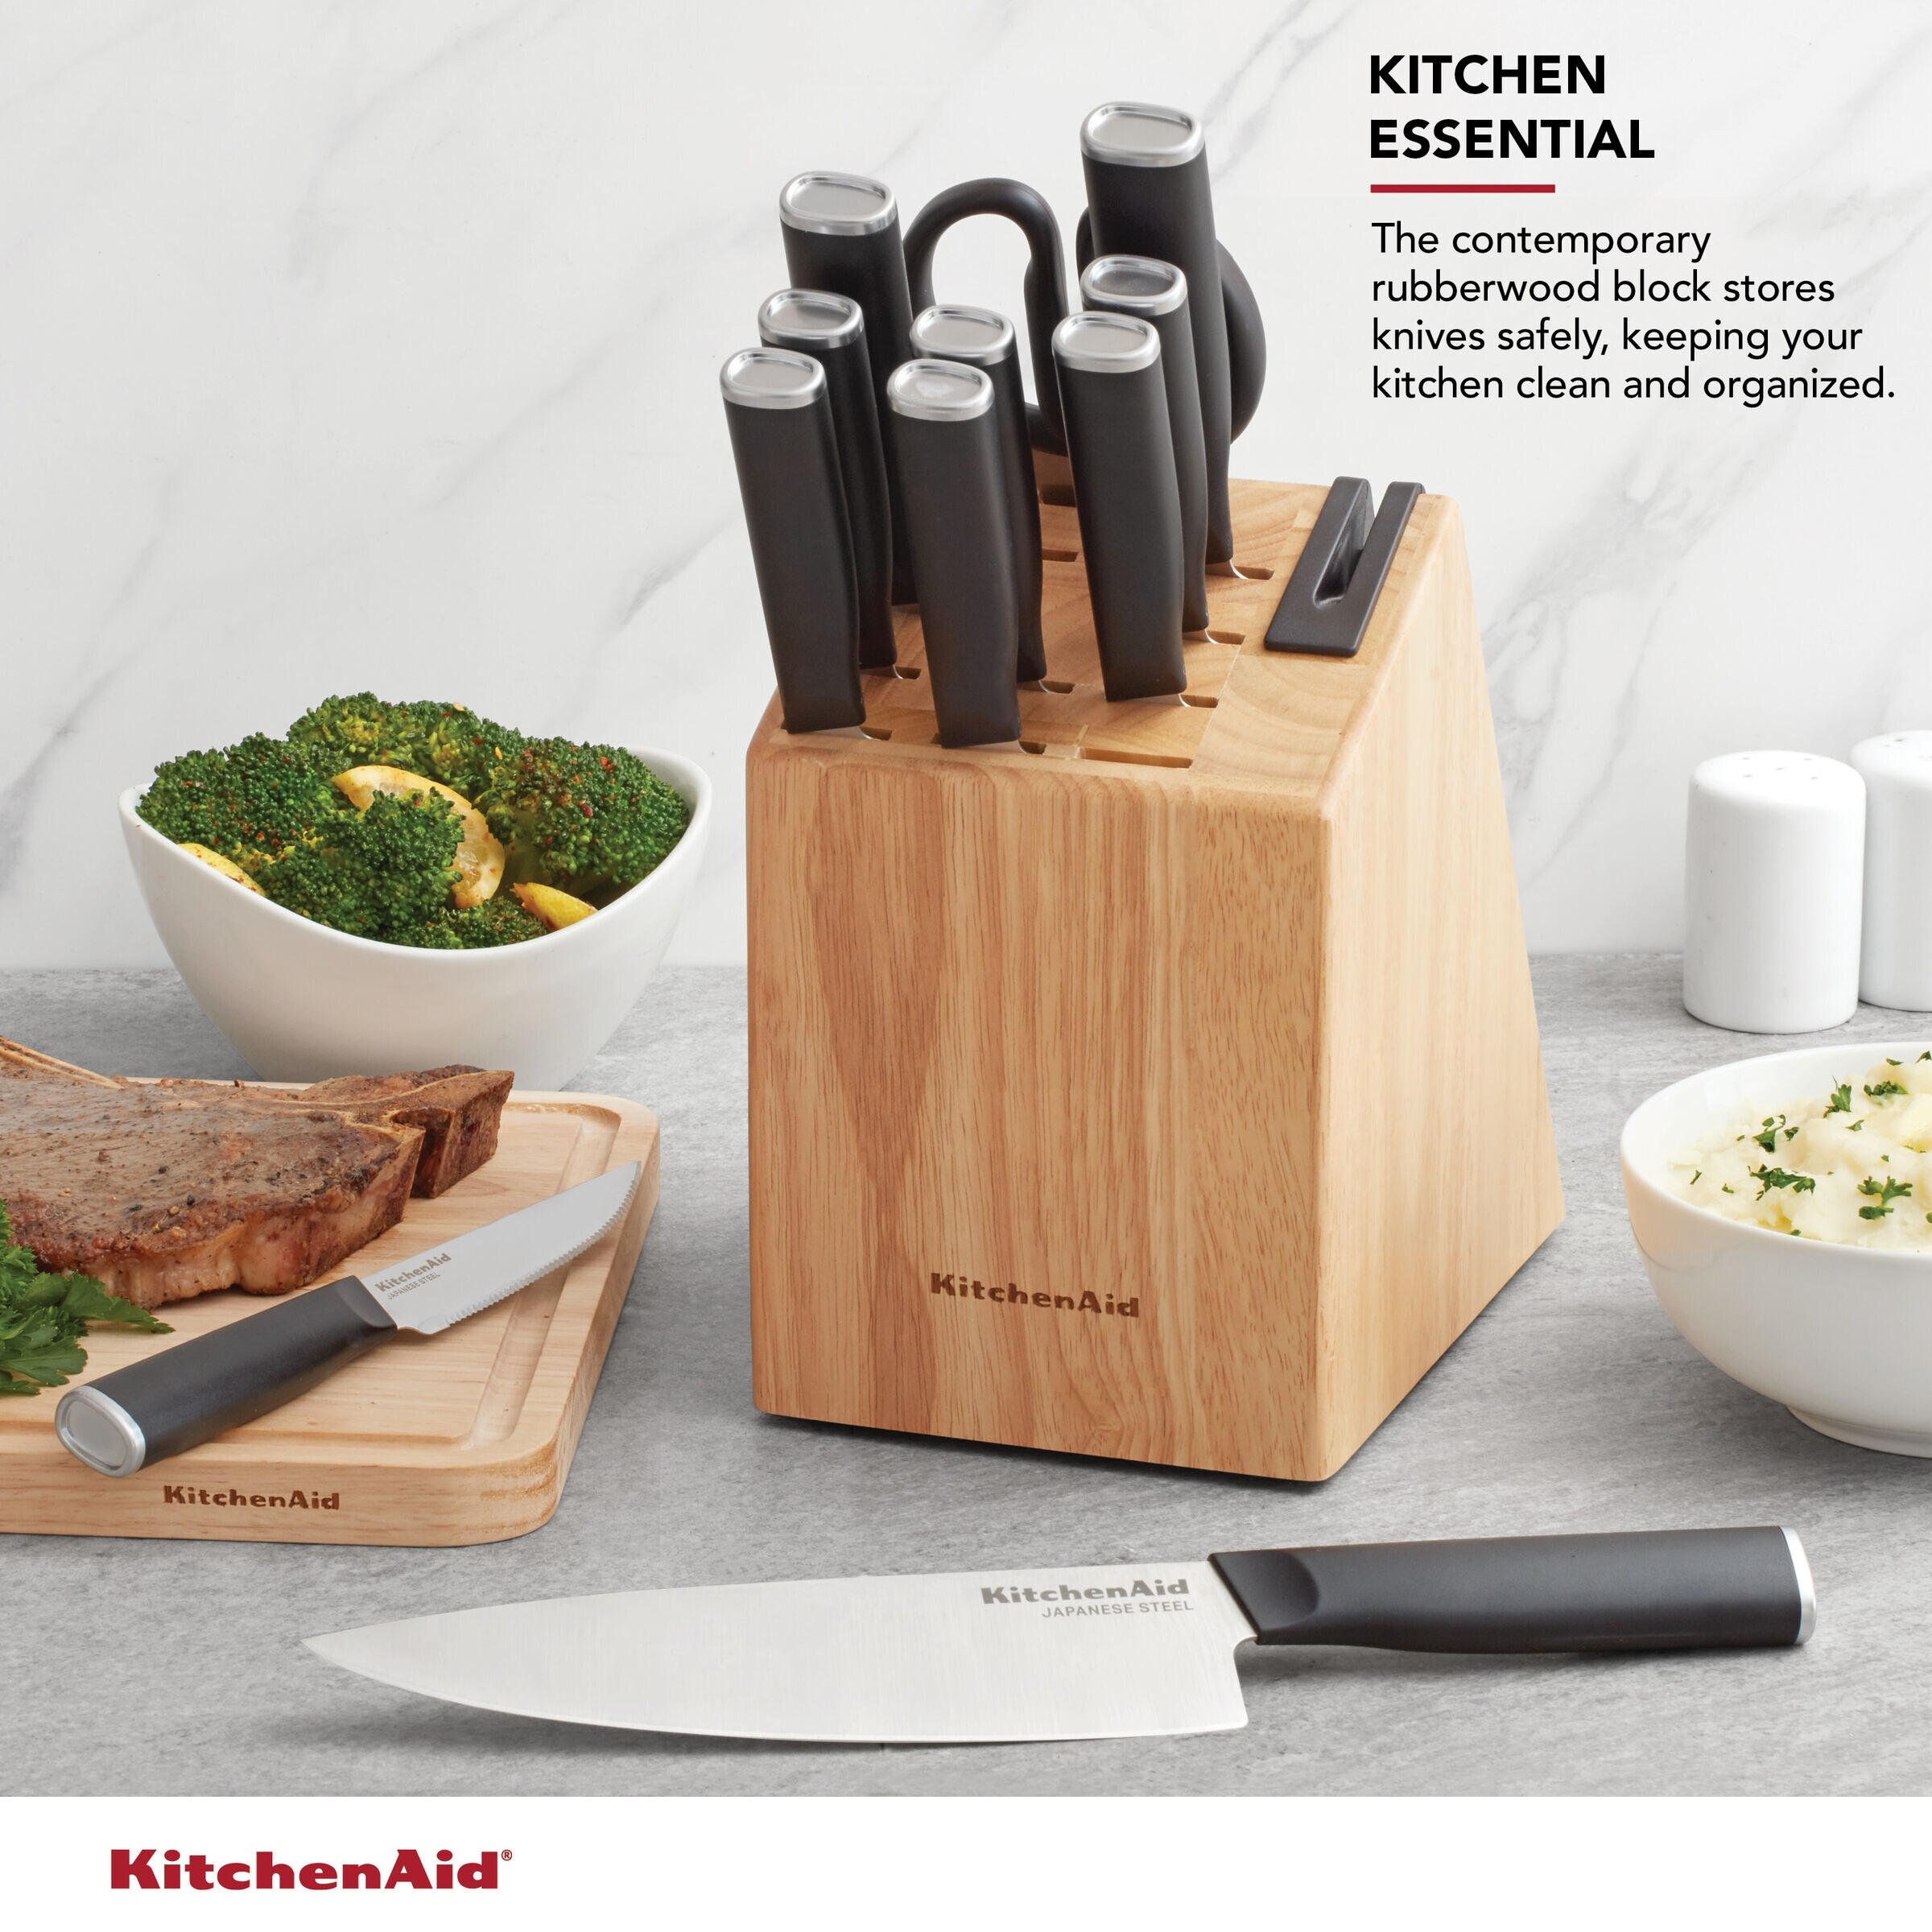 https://ak1.ostkcdn.com/images/products/is/images/direct/0d84ce28f409a5dba8995432cbba0e0d079b8d59/KitchenAid-Classic-12-Piece-Block-Set-with-Built-in-Knife-Sharpener%2C-Natural.jpg